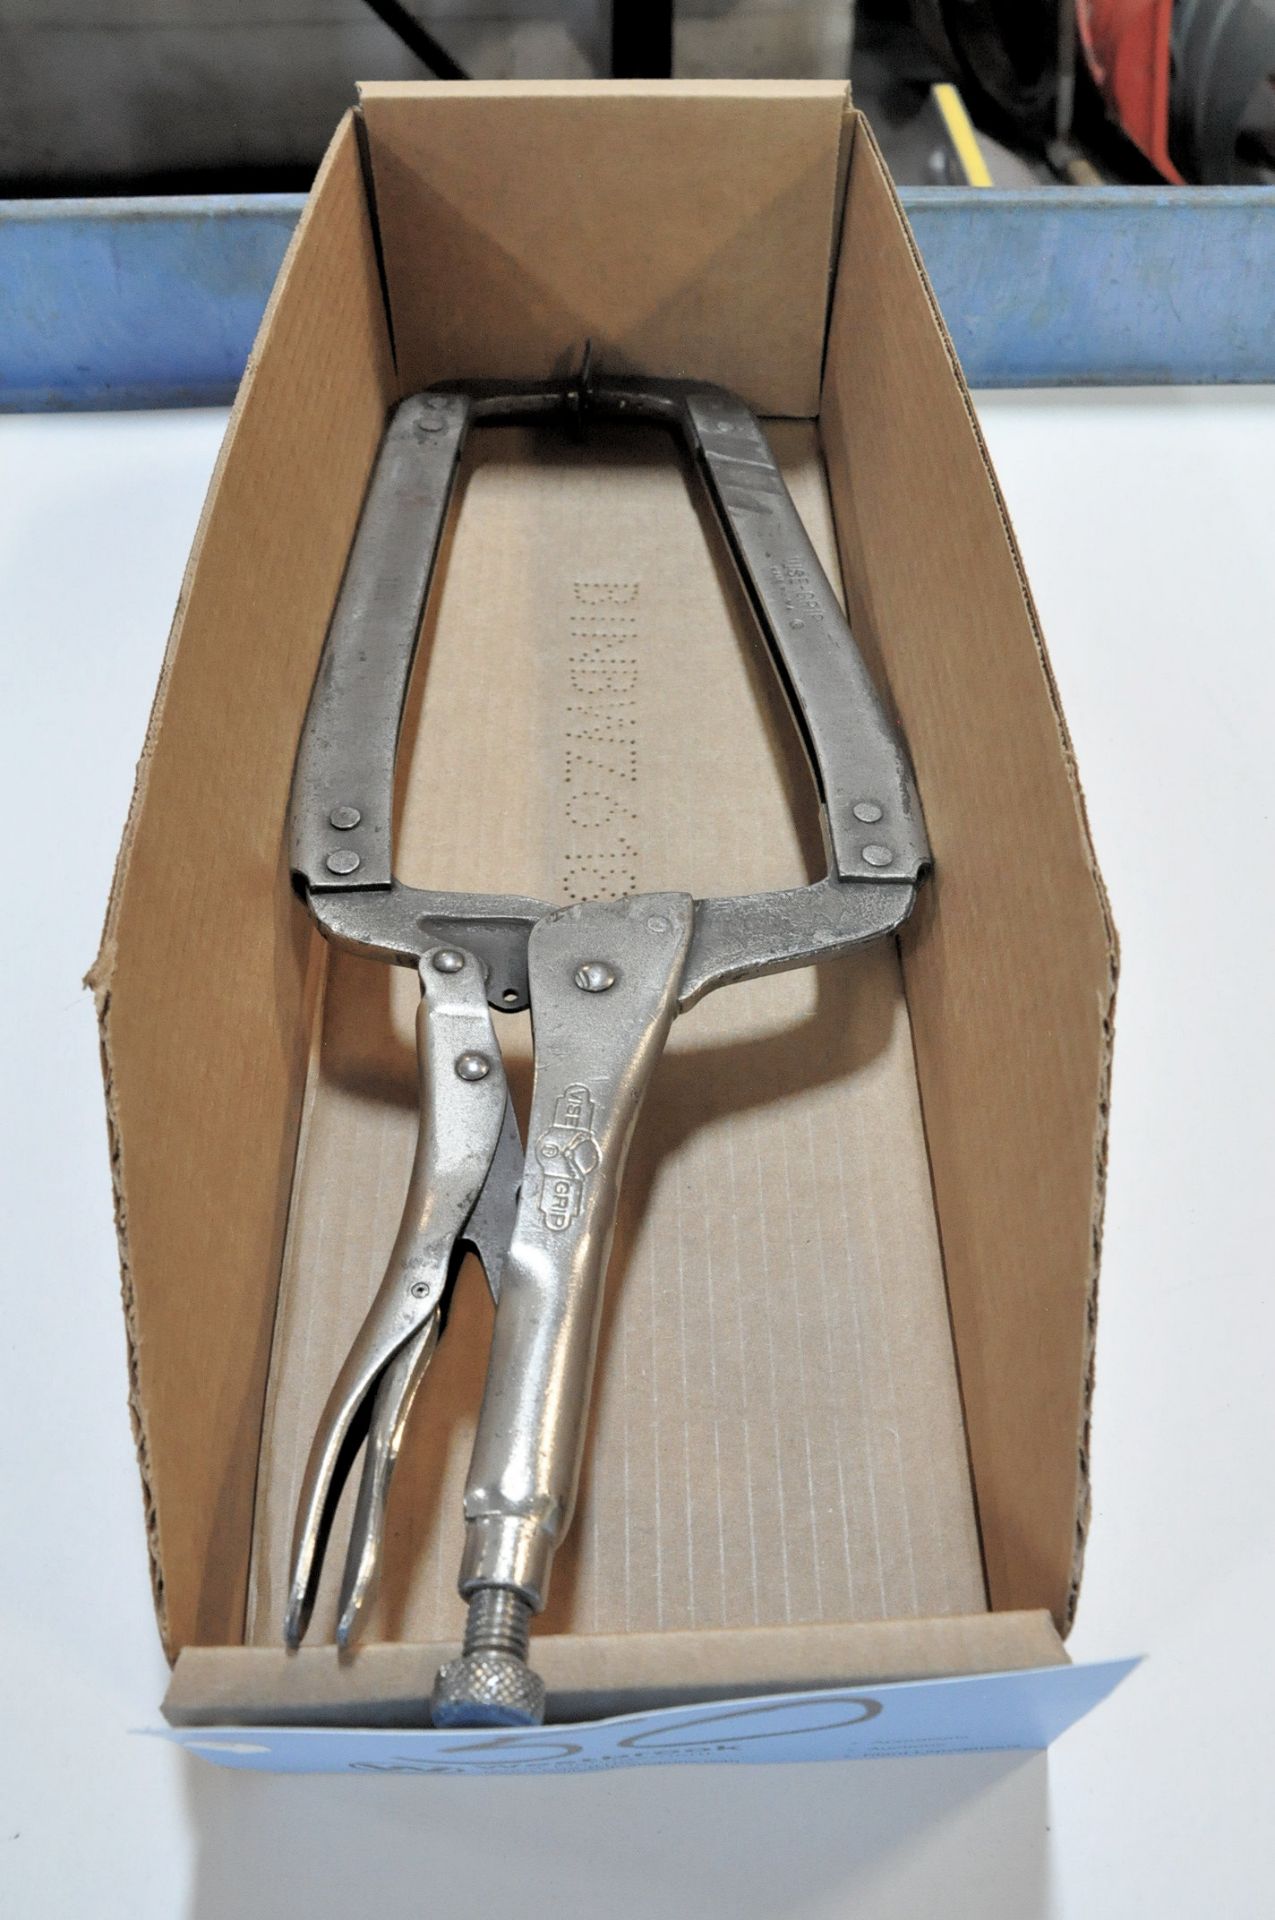 Vise Grip Welding Clamp in (1) Box